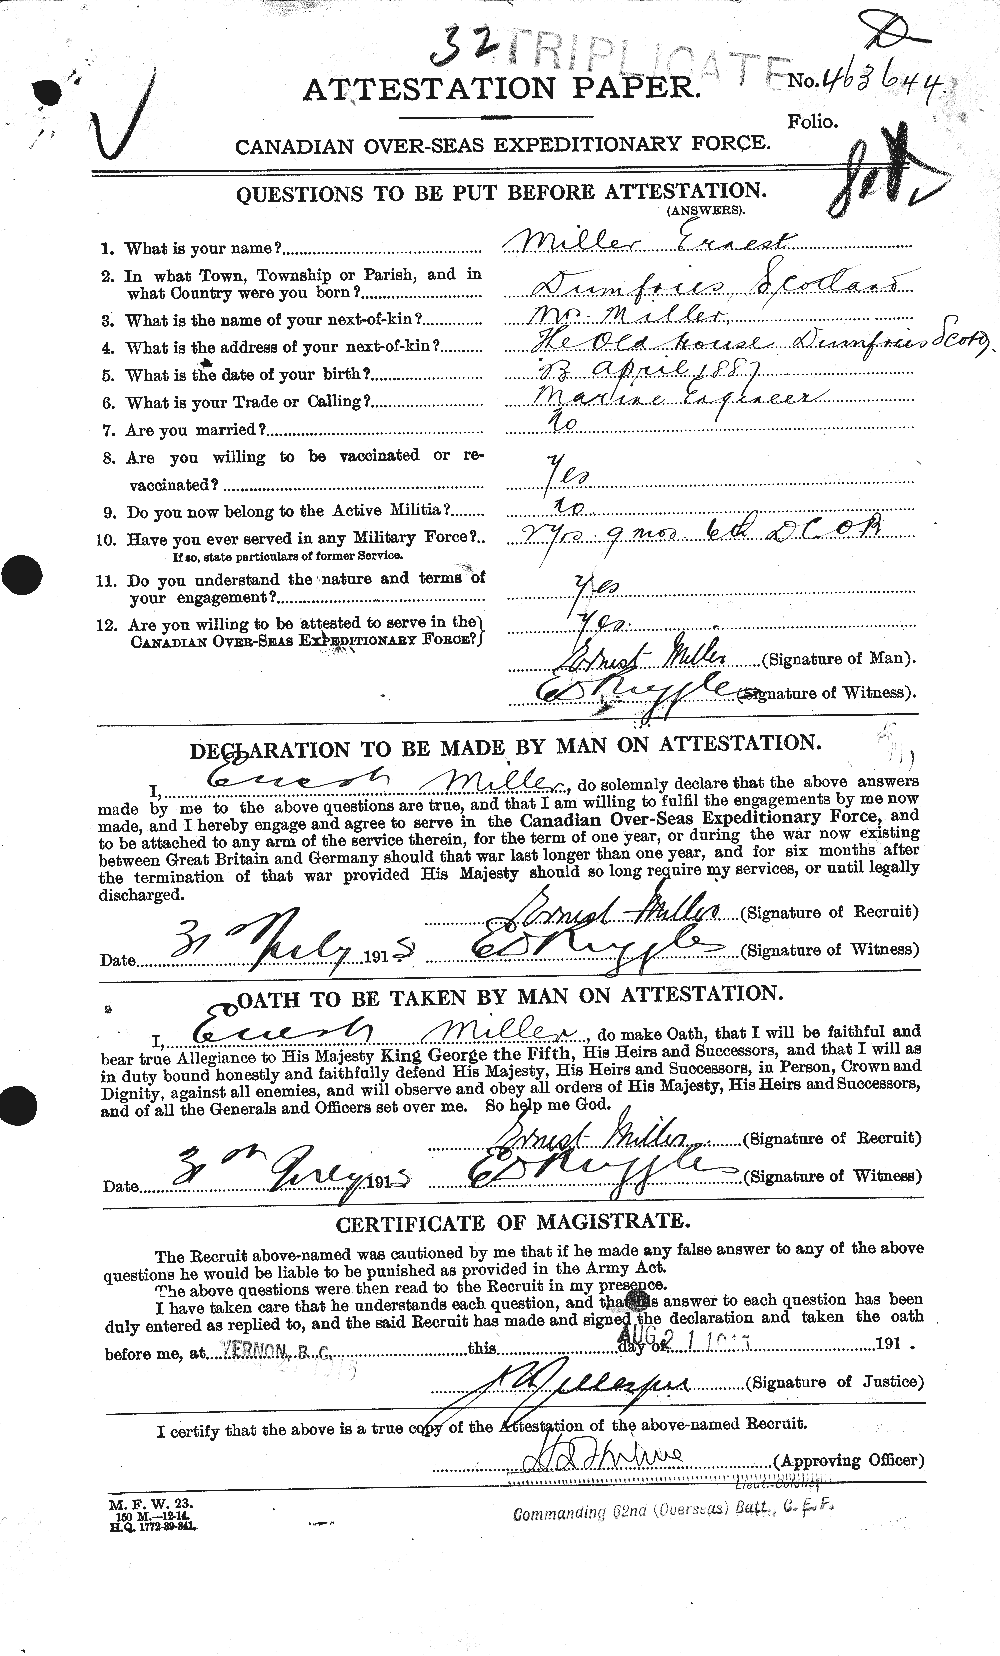 Personnel Records of the First World War - CEF 500495a